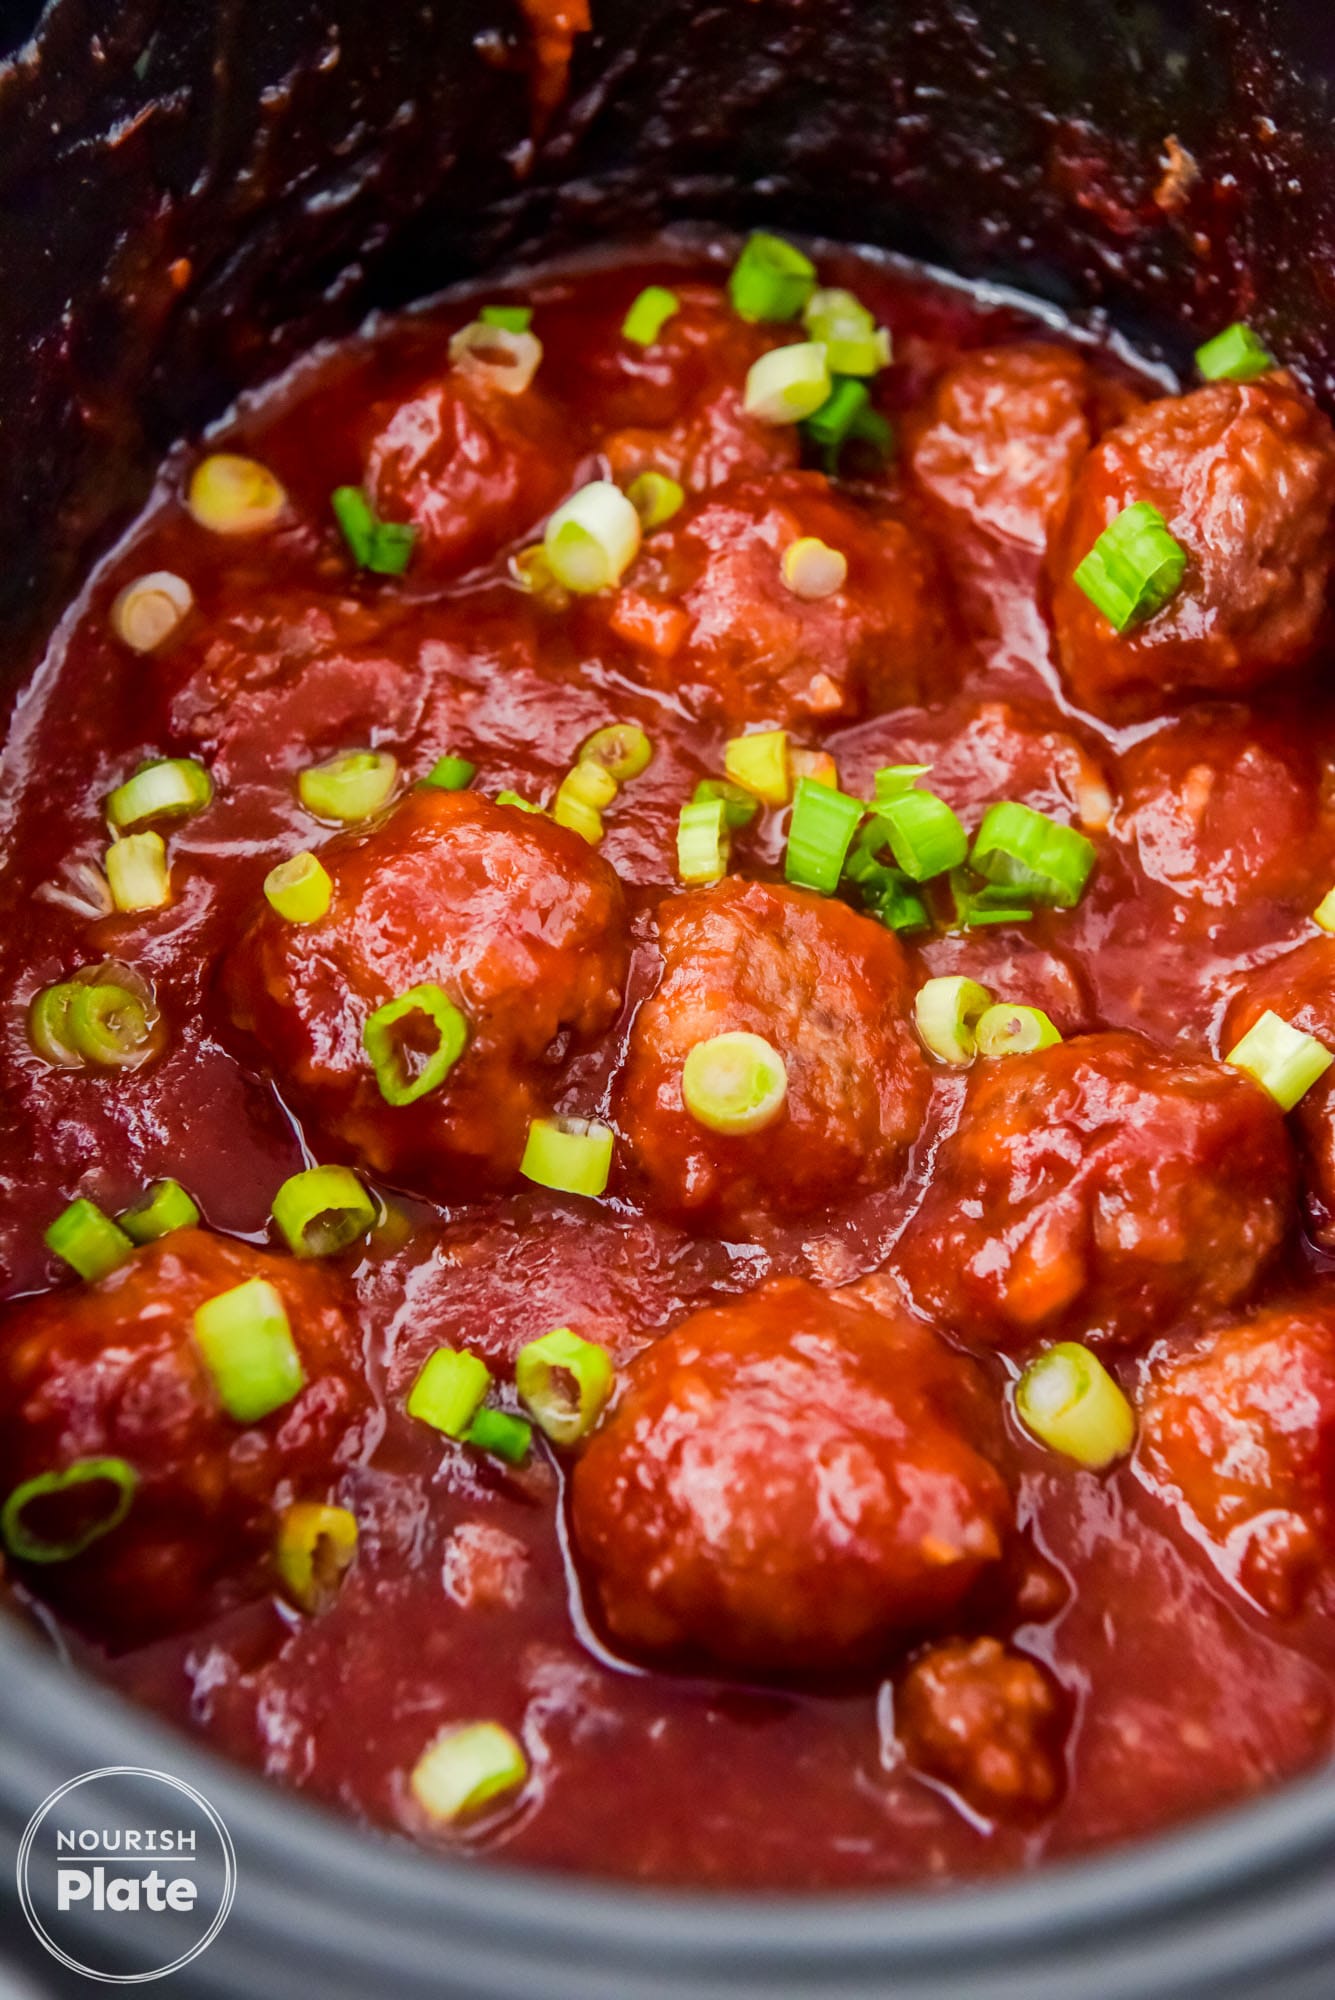 Spicy cranberry meatballs in the slow cooker, garnished with sliced green onions.